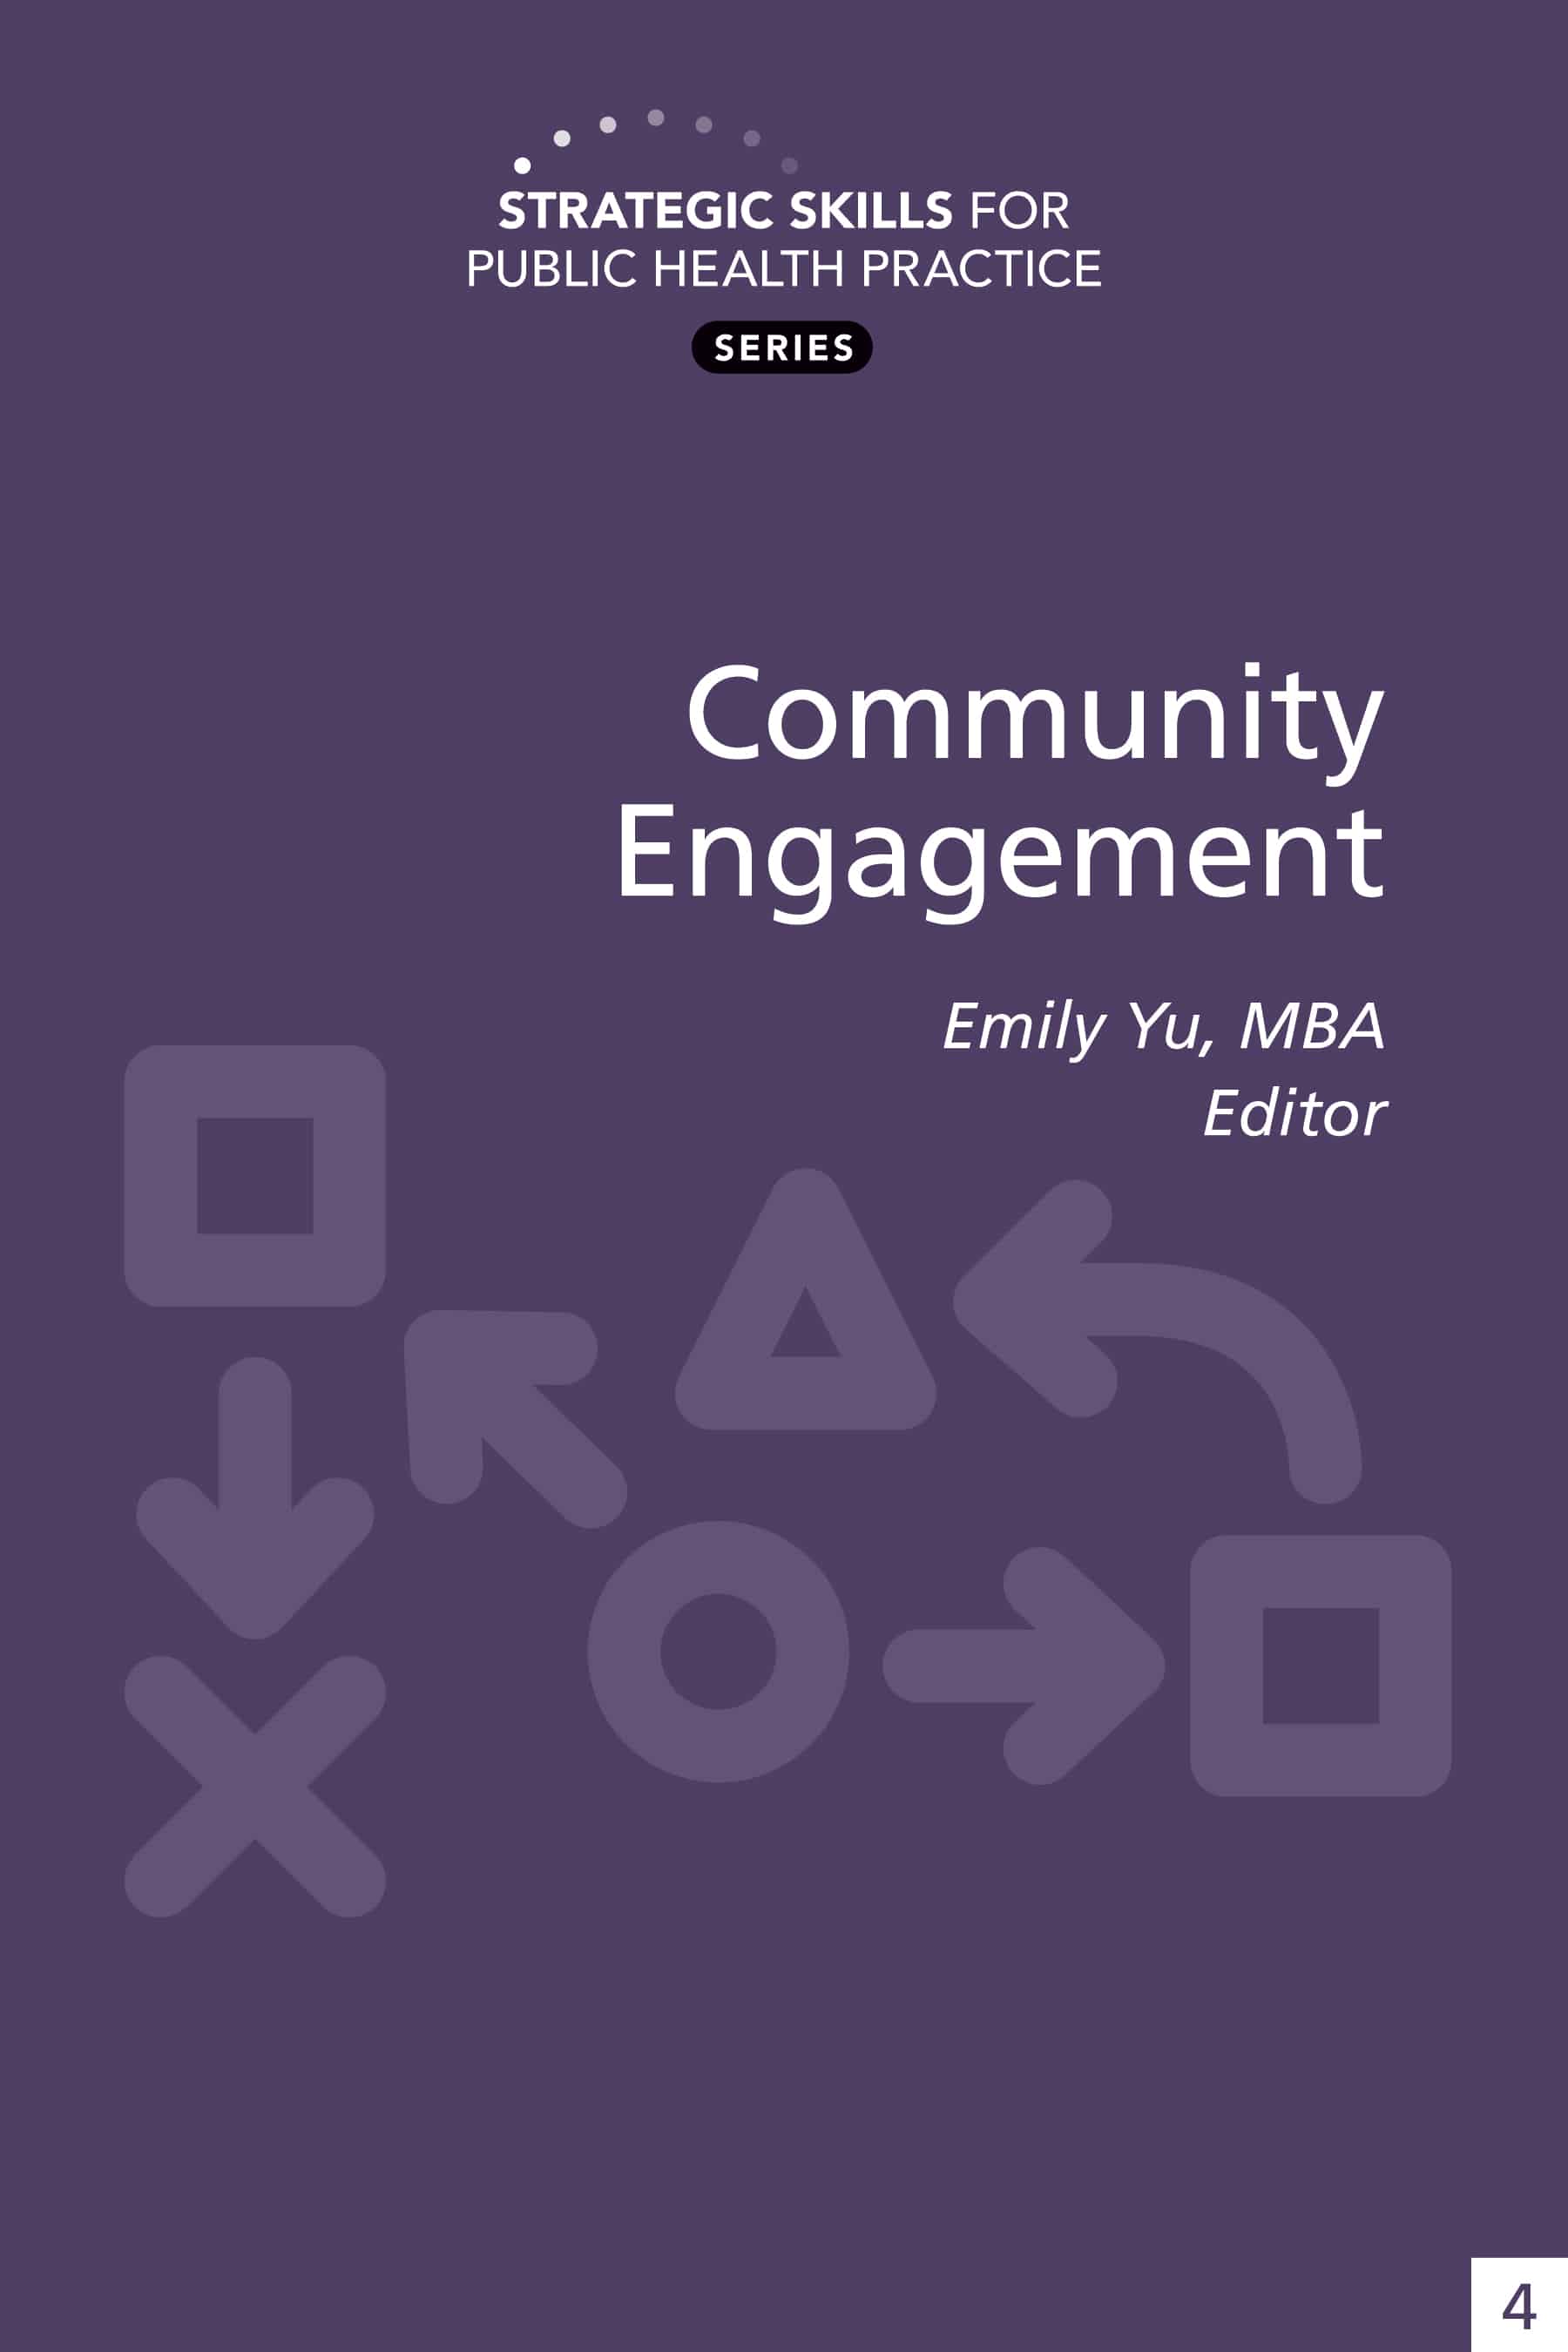 Cover of Community Engagement book